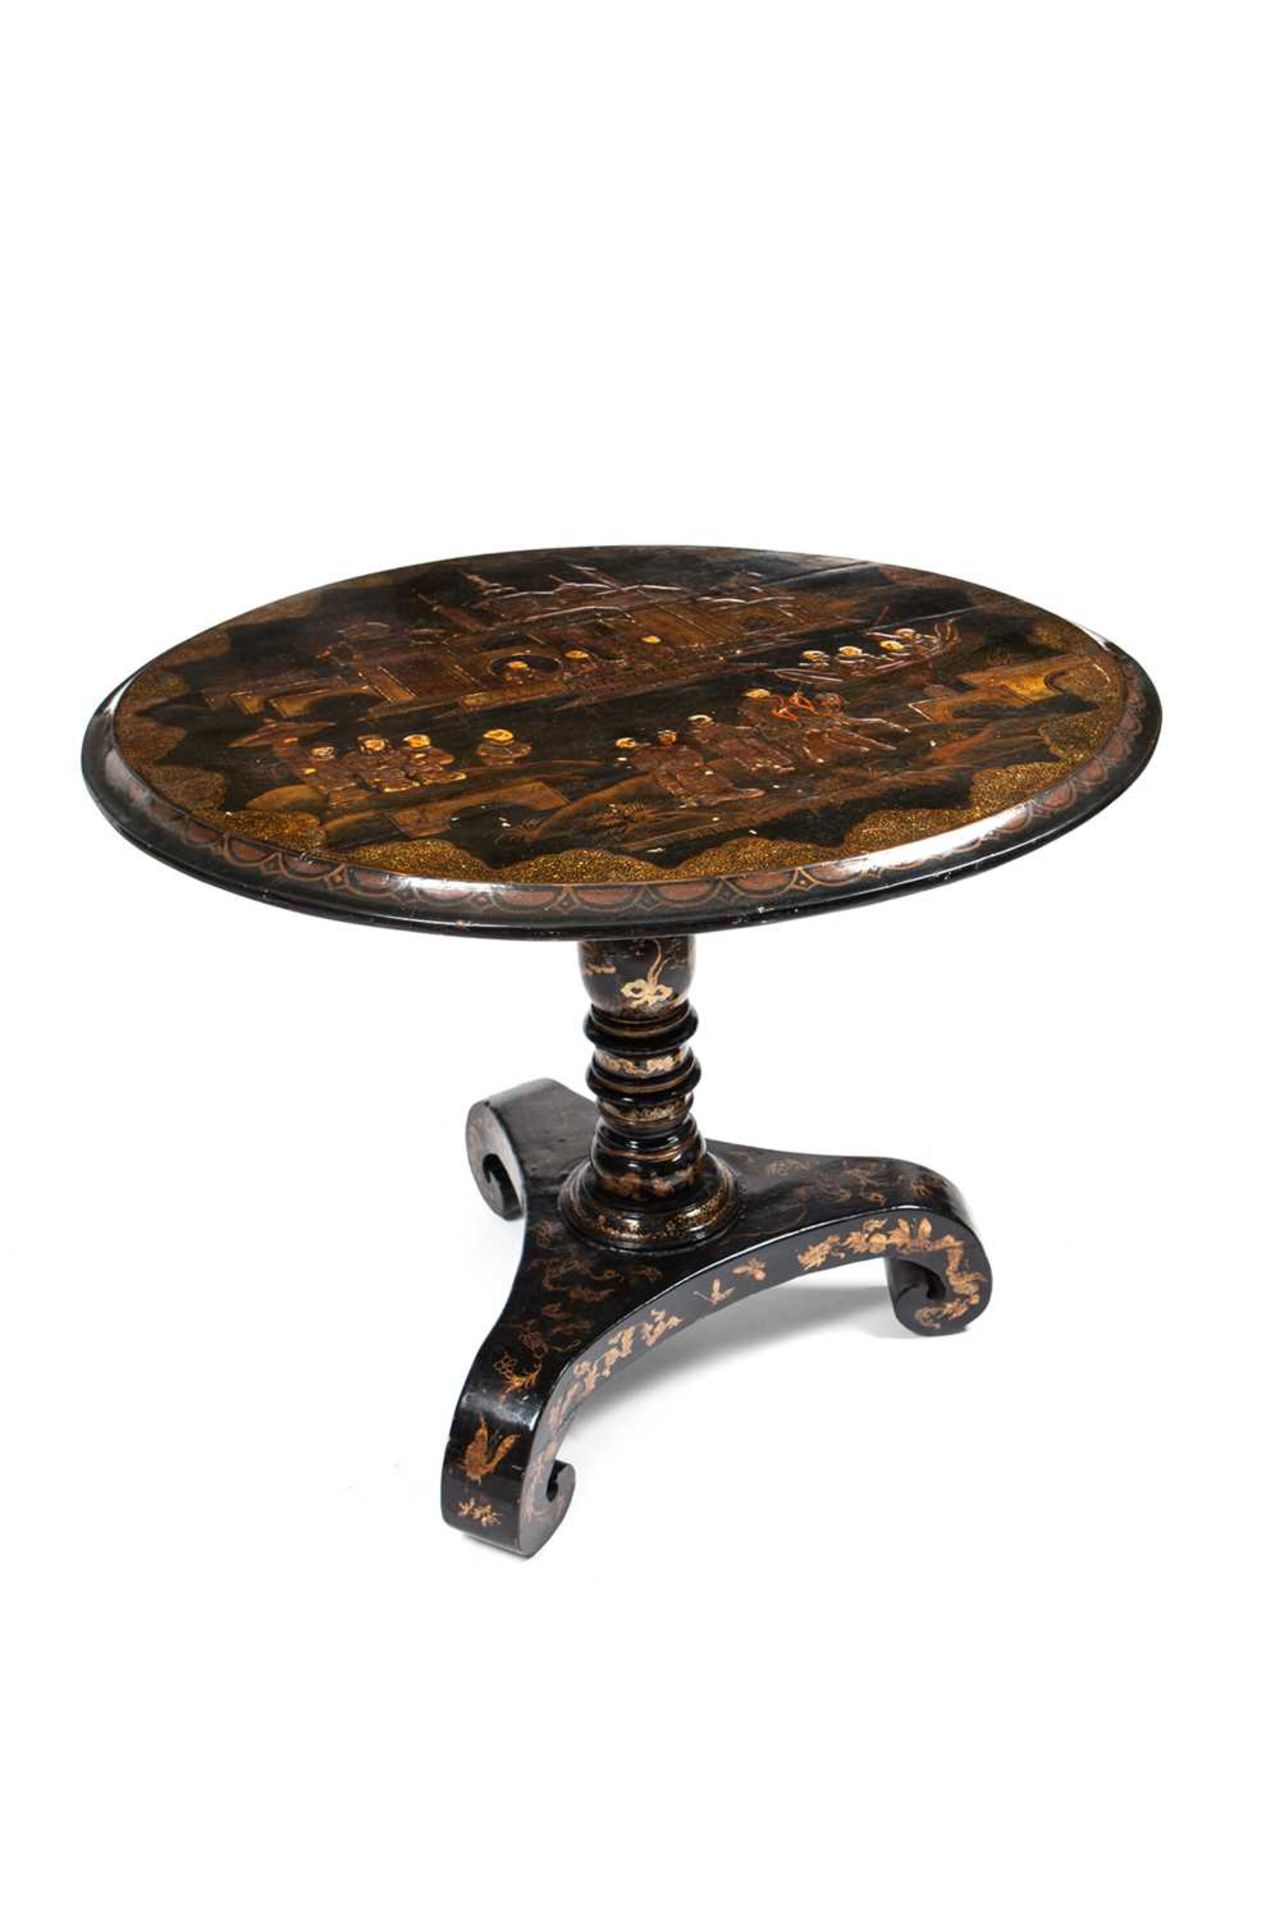 A LATE 19TH CENTURY CHINESE EXPORT LACQUERED TABLE